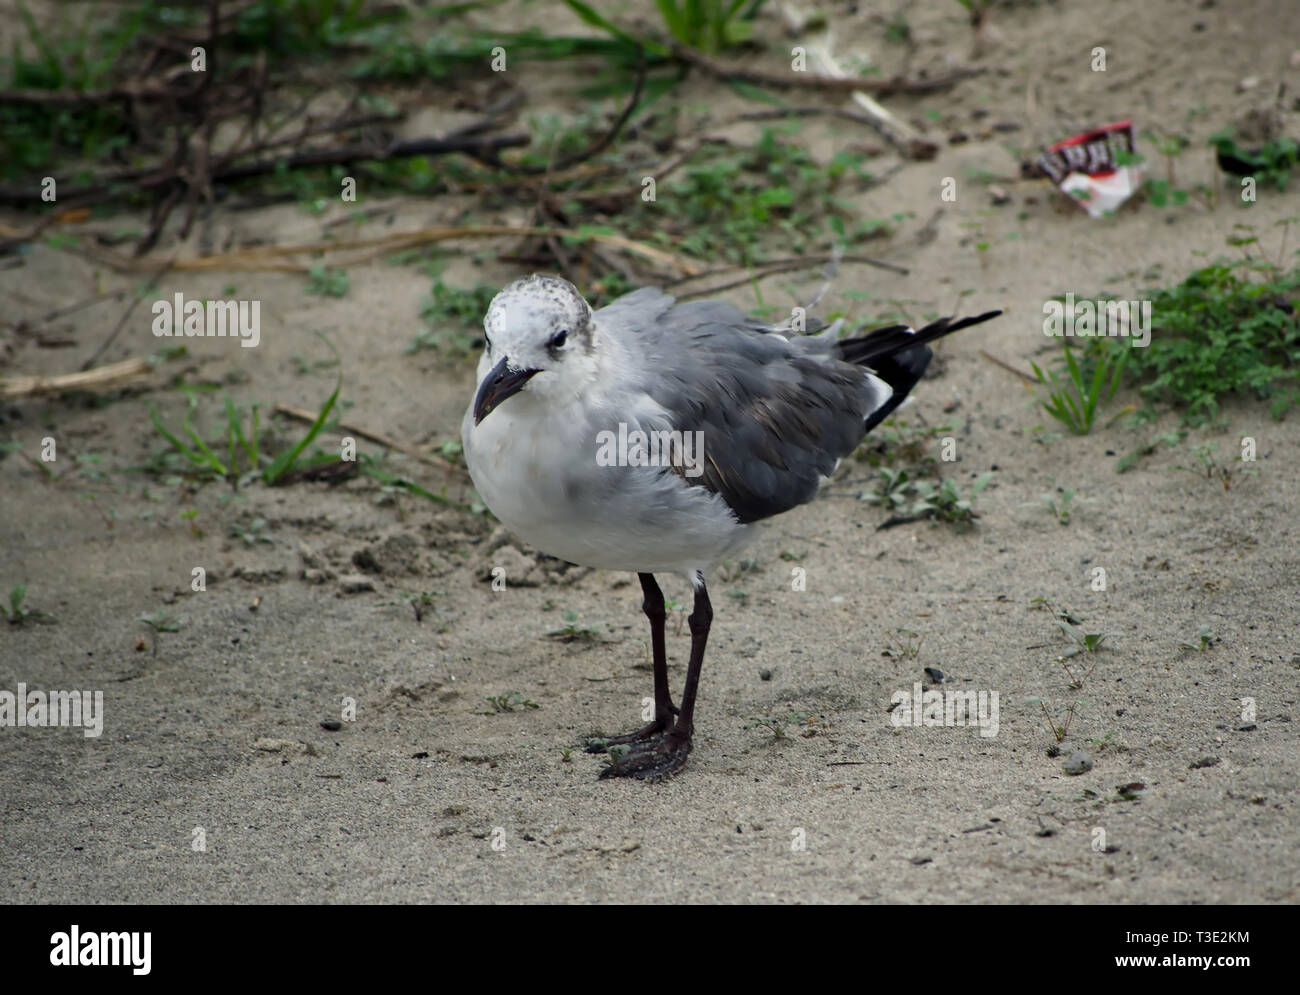 A laughing gull in non-breeding plumage stands in the sand on Dauphin Island, Alabama Dec. 25, 2011. Stock Photo